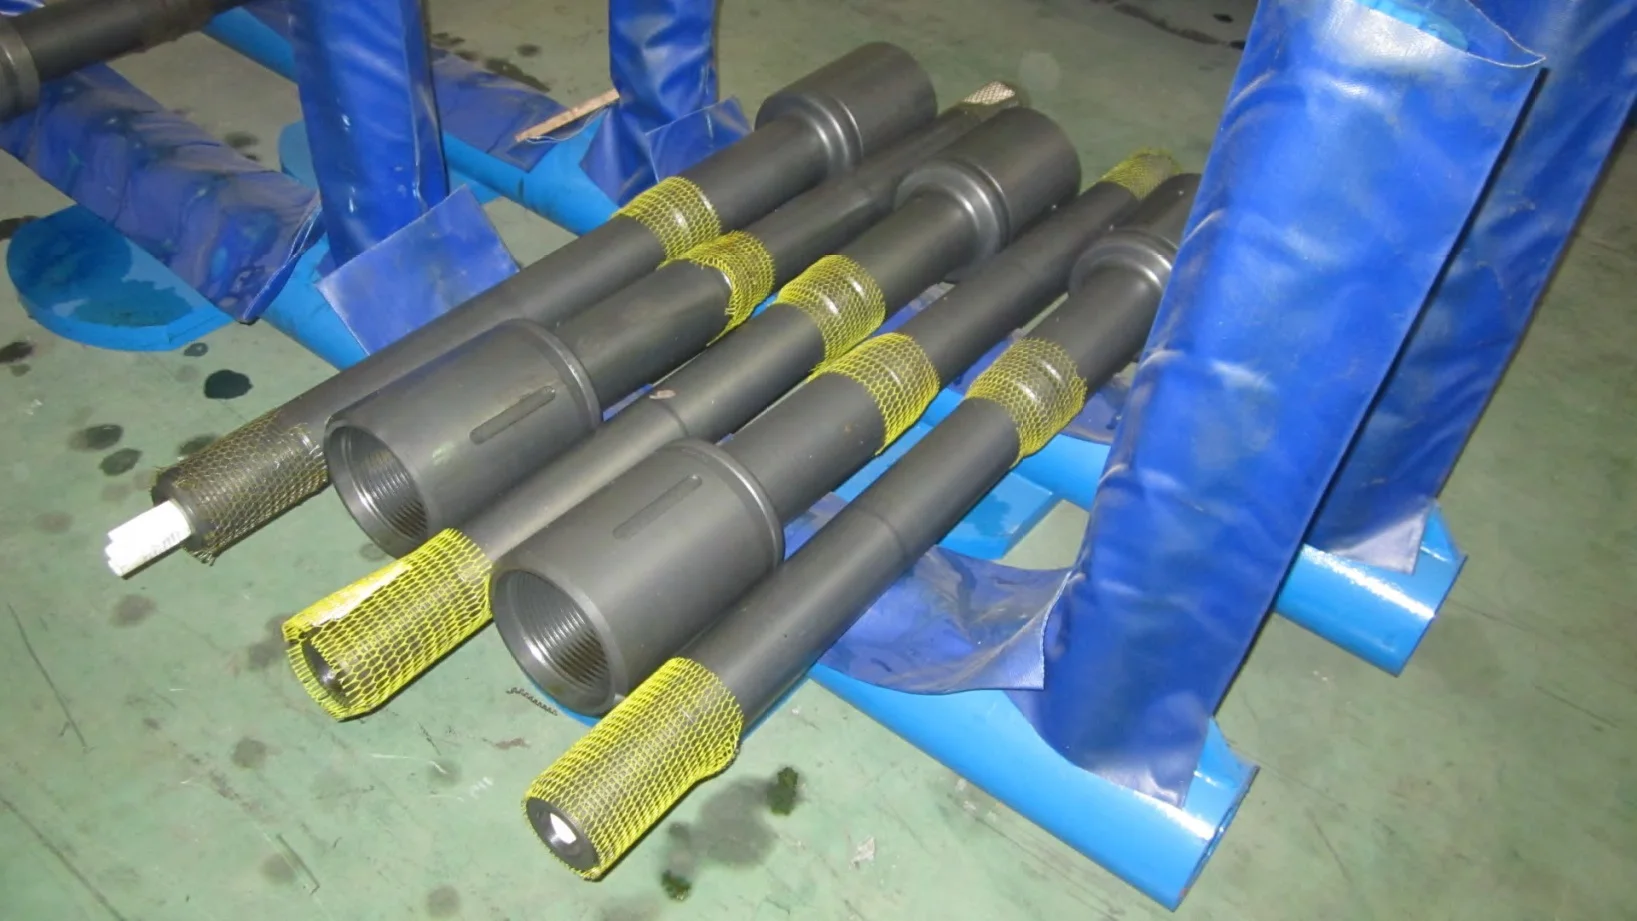 API 7-1 Downhole Drilling Mud Motor for HDD Oil Gas and Coiled Tubing